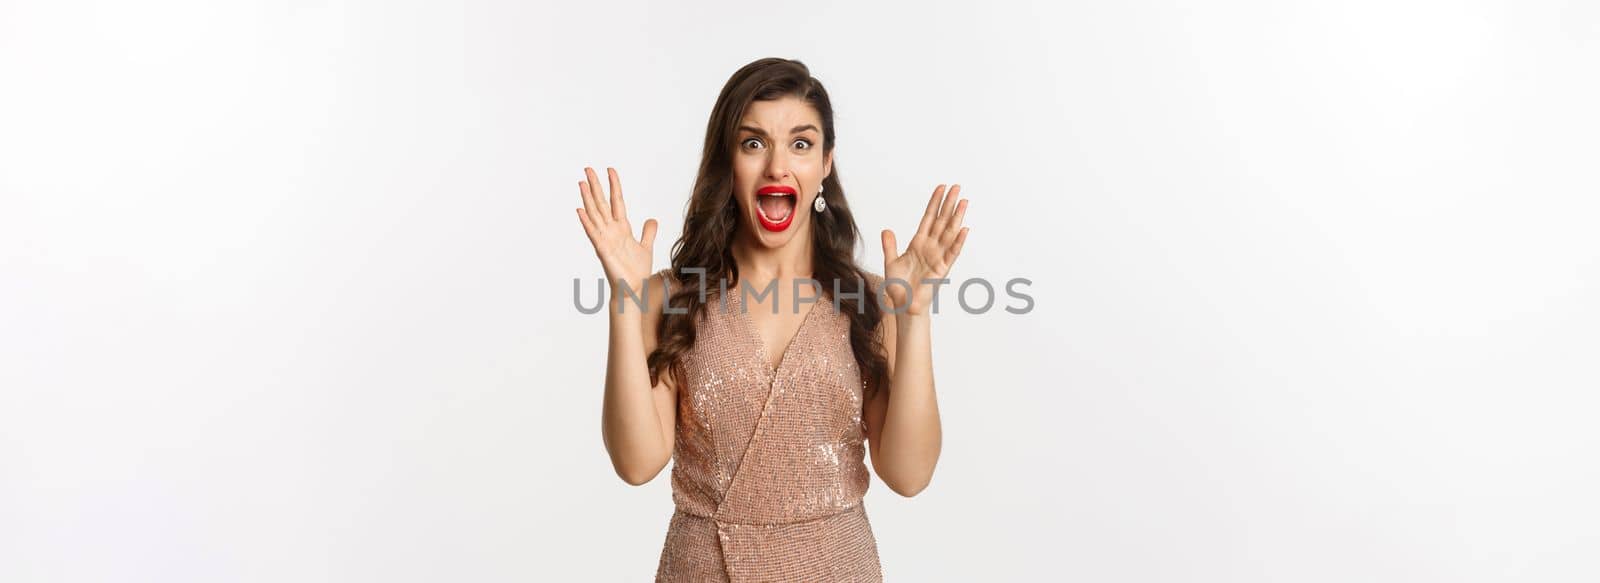 Celebration and party concept. Beautiful woman in elegant dress screaming and staring at camera scared, looking at something scary, standing over white background.